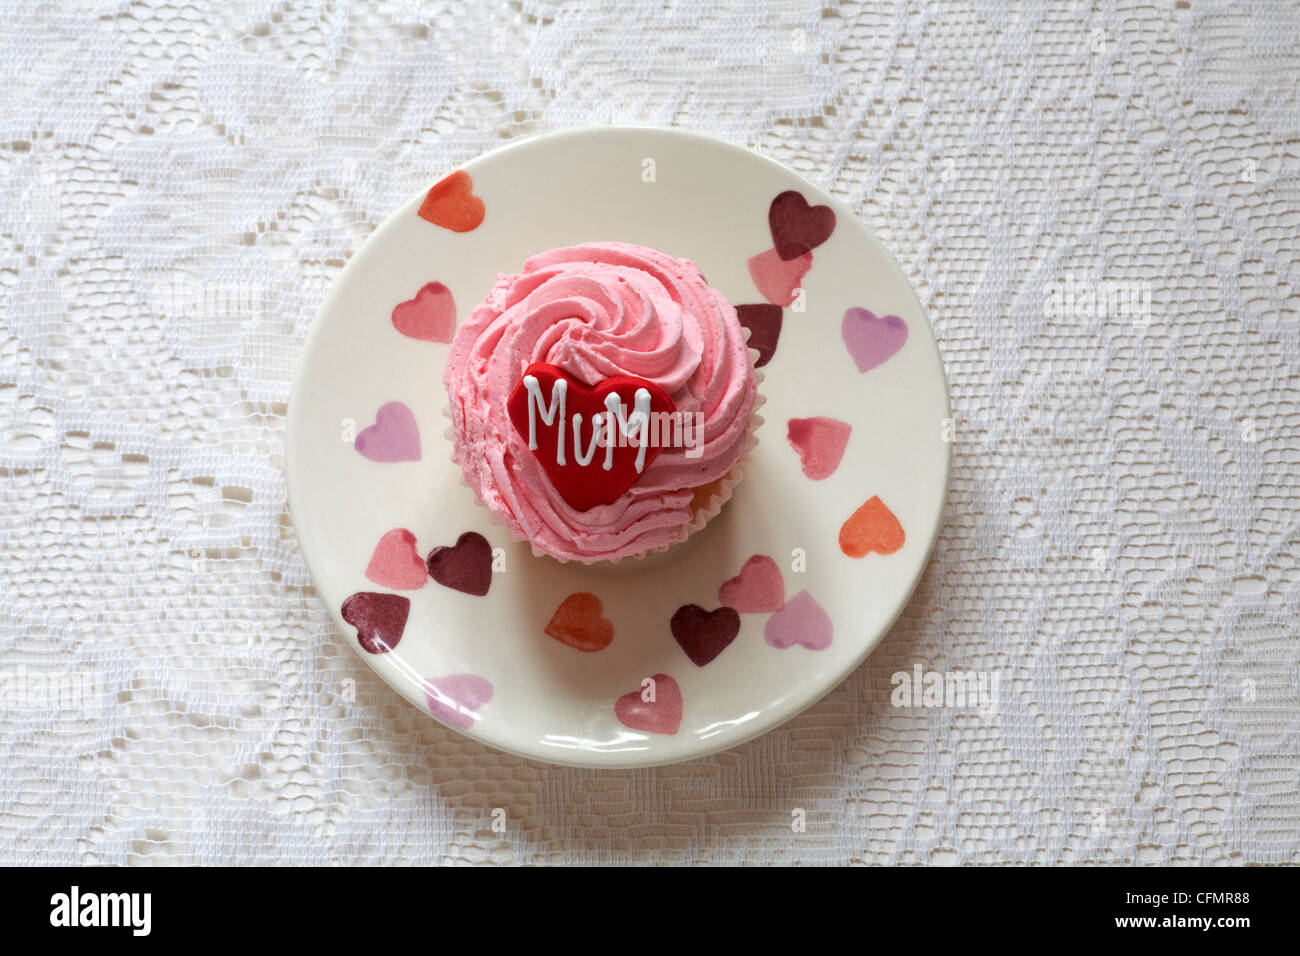 strawberry cupcake with the word mum iced on red heart for Mothering Sunday, Mothers Day set on plate with hearts on Stock Photo